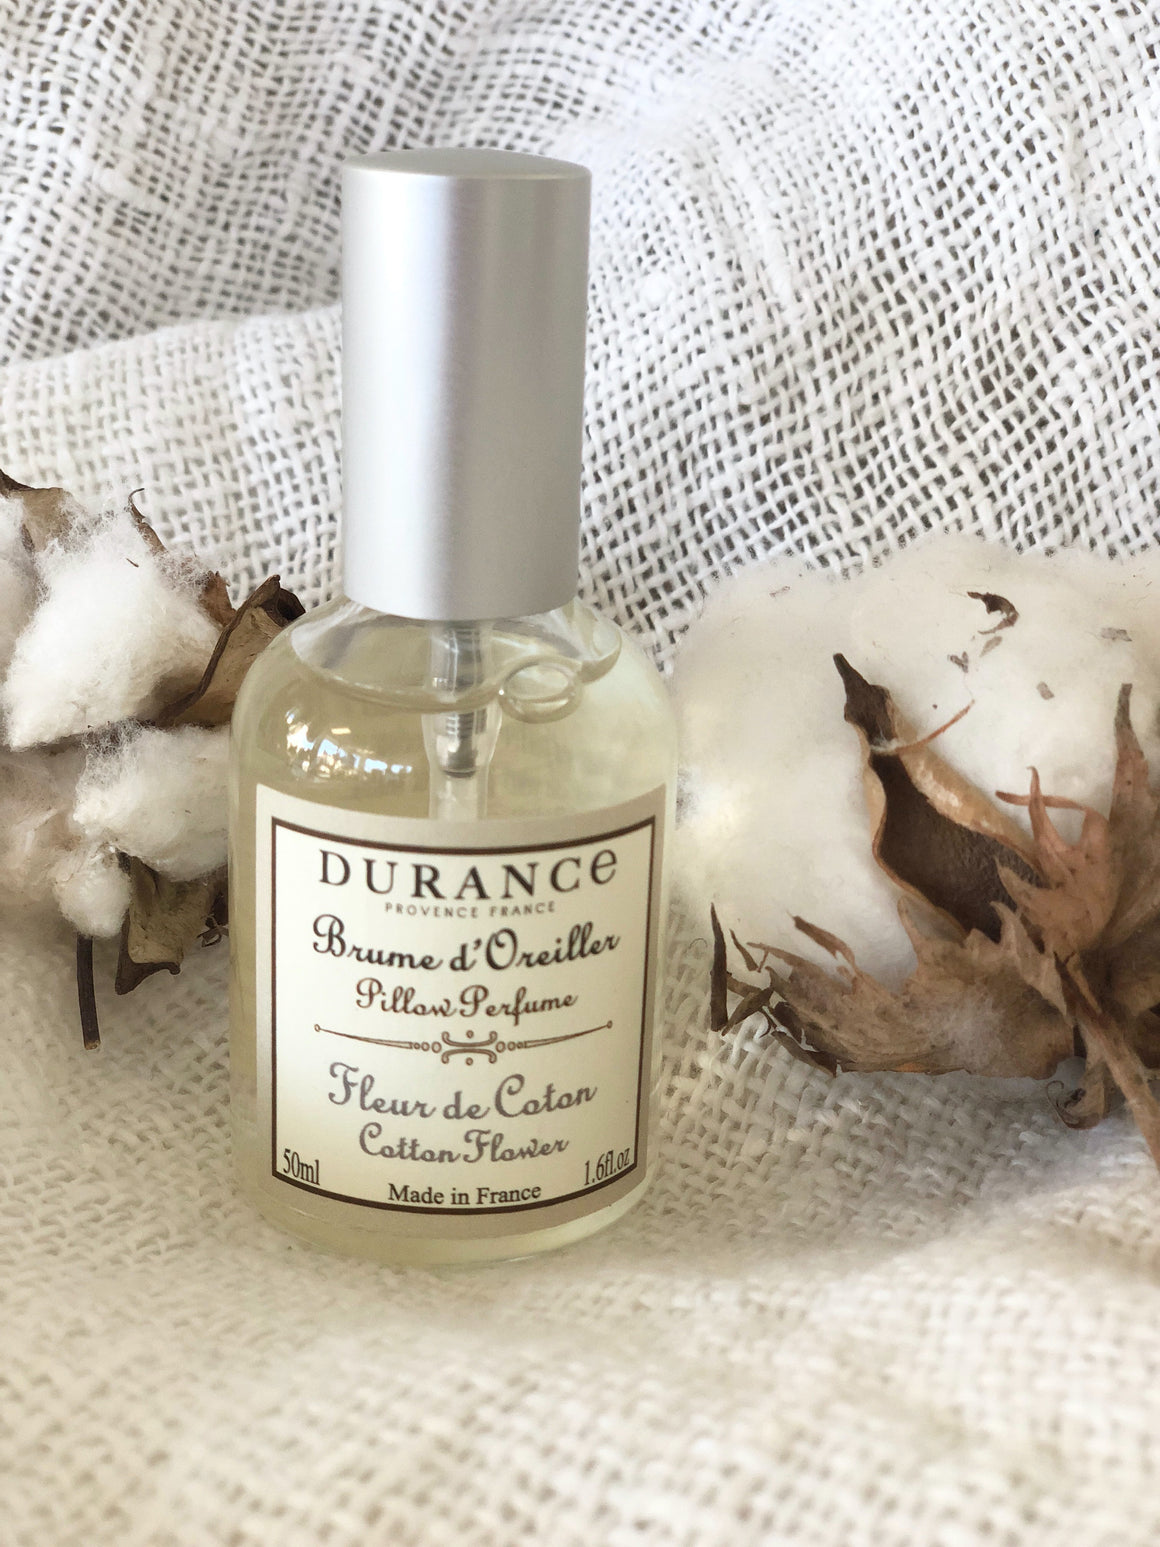 Cotton Flower Pillow Mist by Durance Provence France